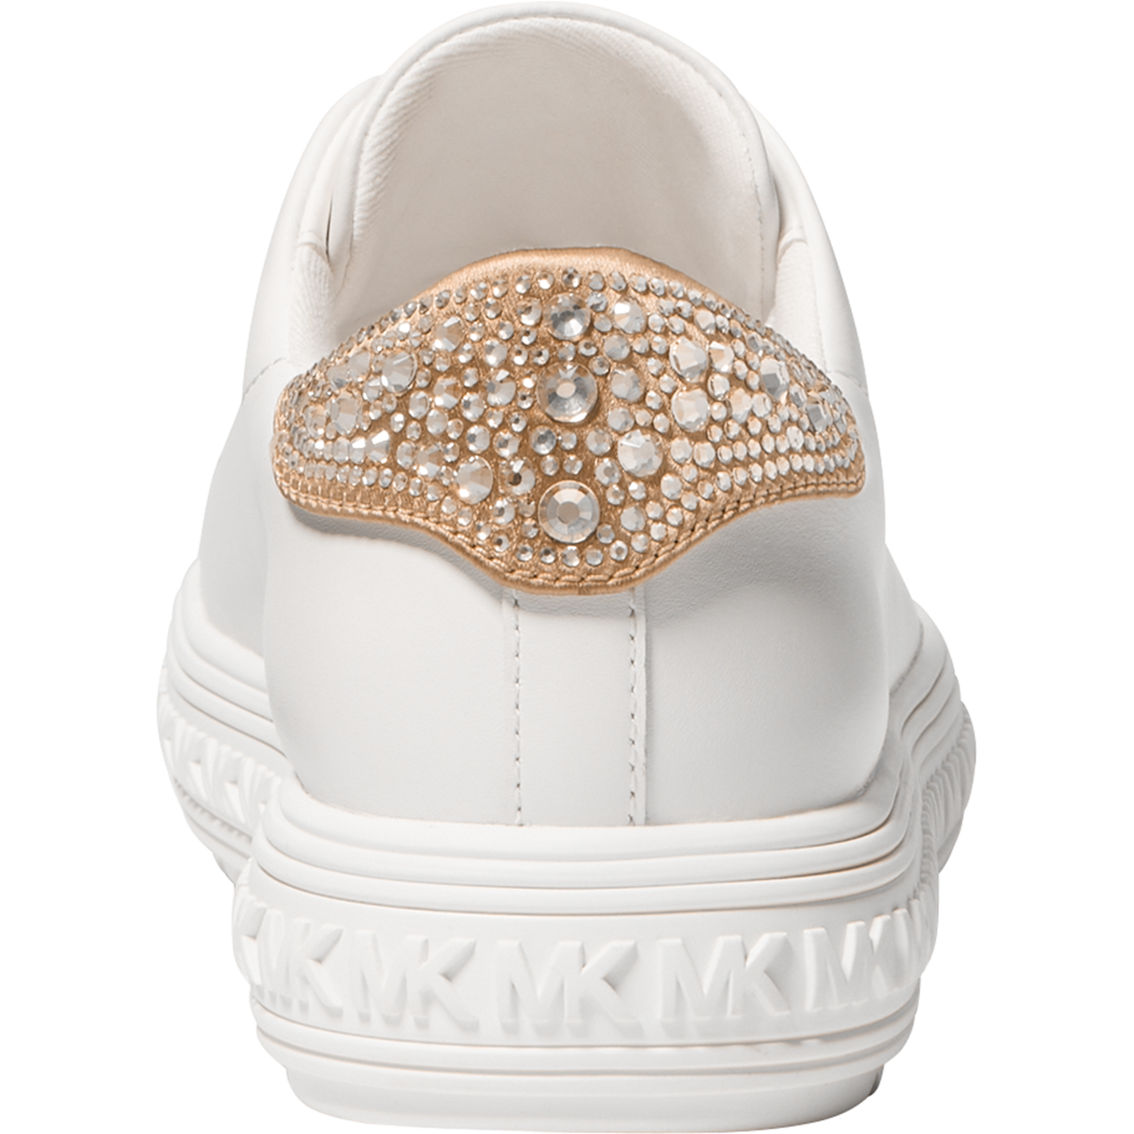 Michael Kors Grove Embellished Leather Sneakers - Image 4 of 4